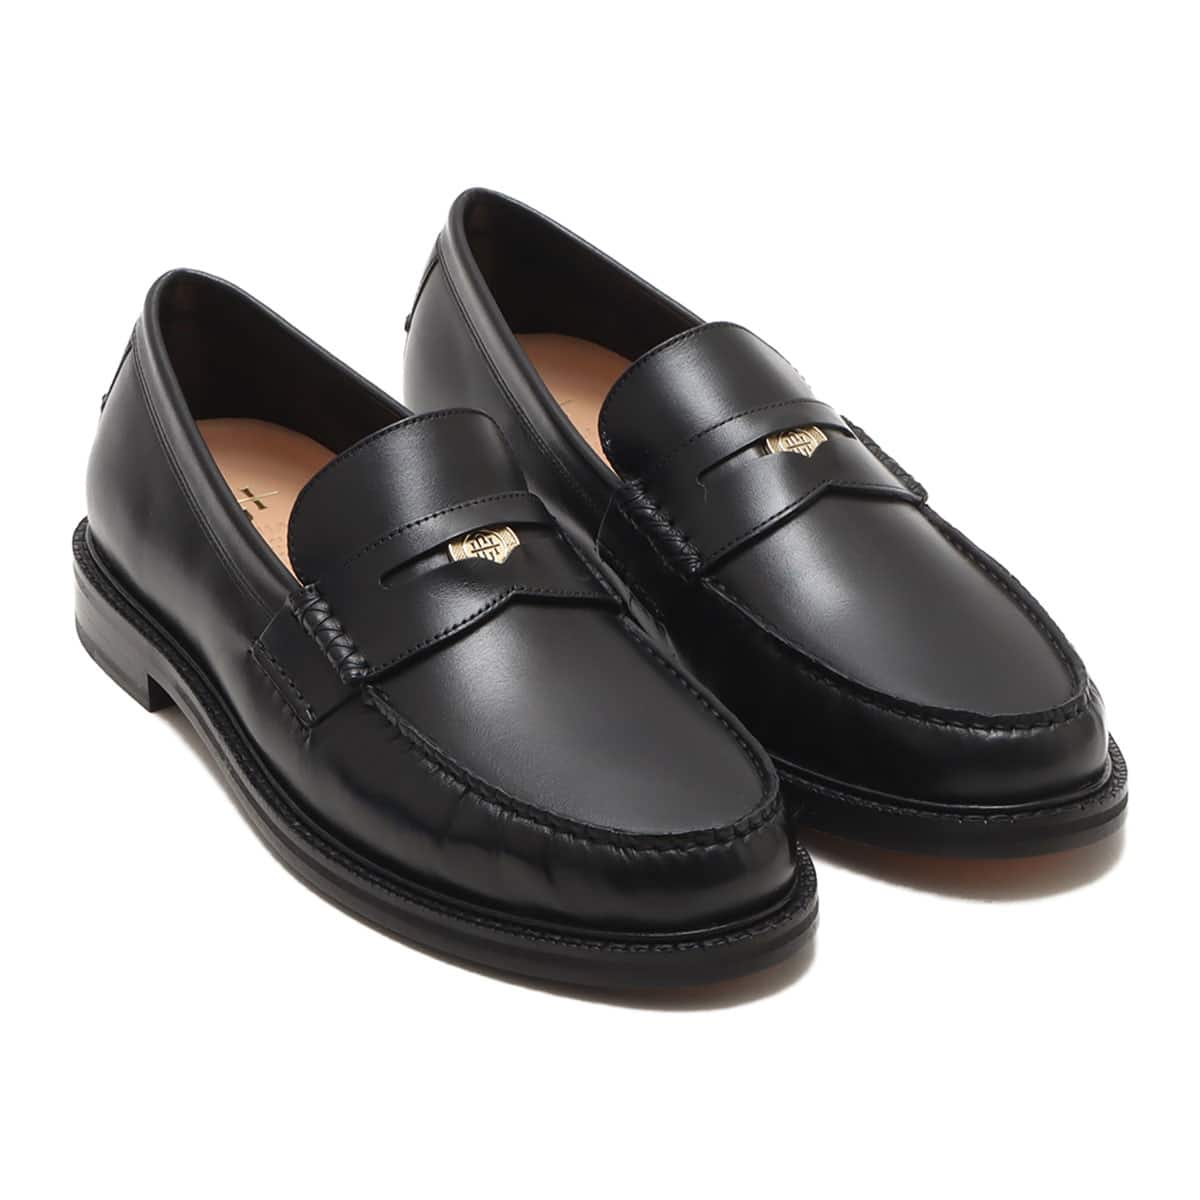 COLE HAAN AMERICAN CLASSICS PINCH PENNY LOAFER BLACK/BLACK 23FA-I